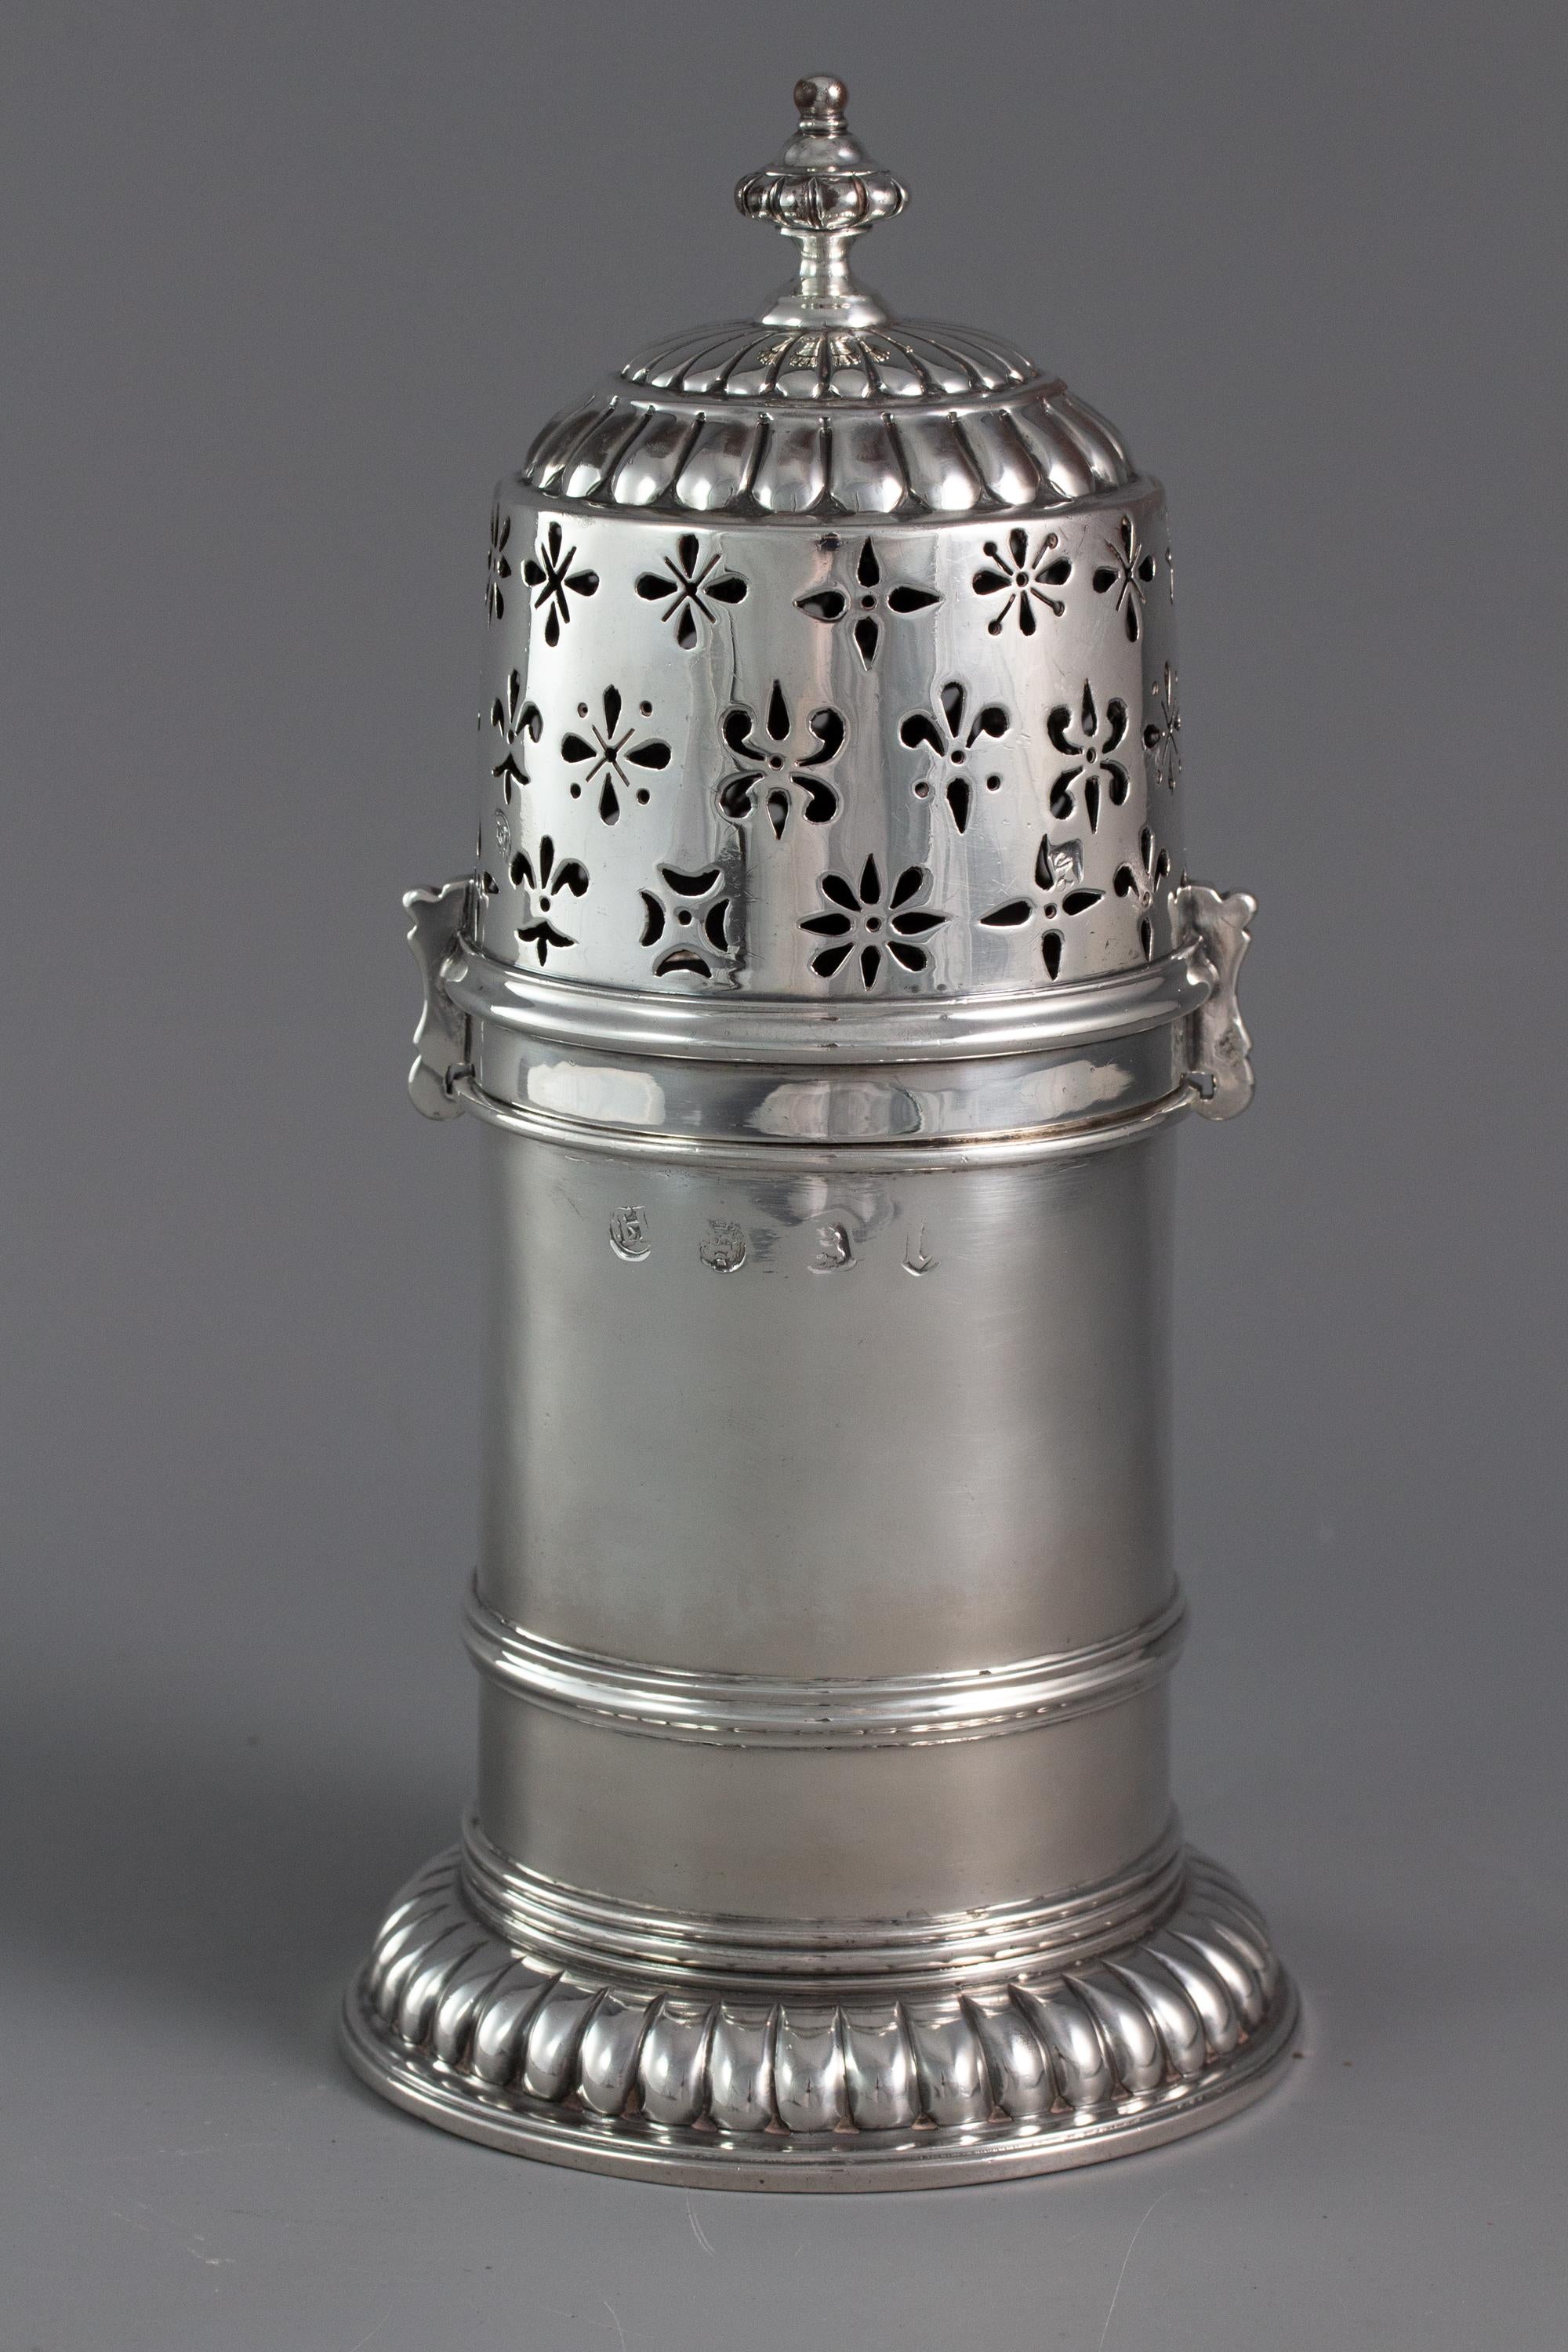 British Matched Set of Three Late 17th Century Silver Casters